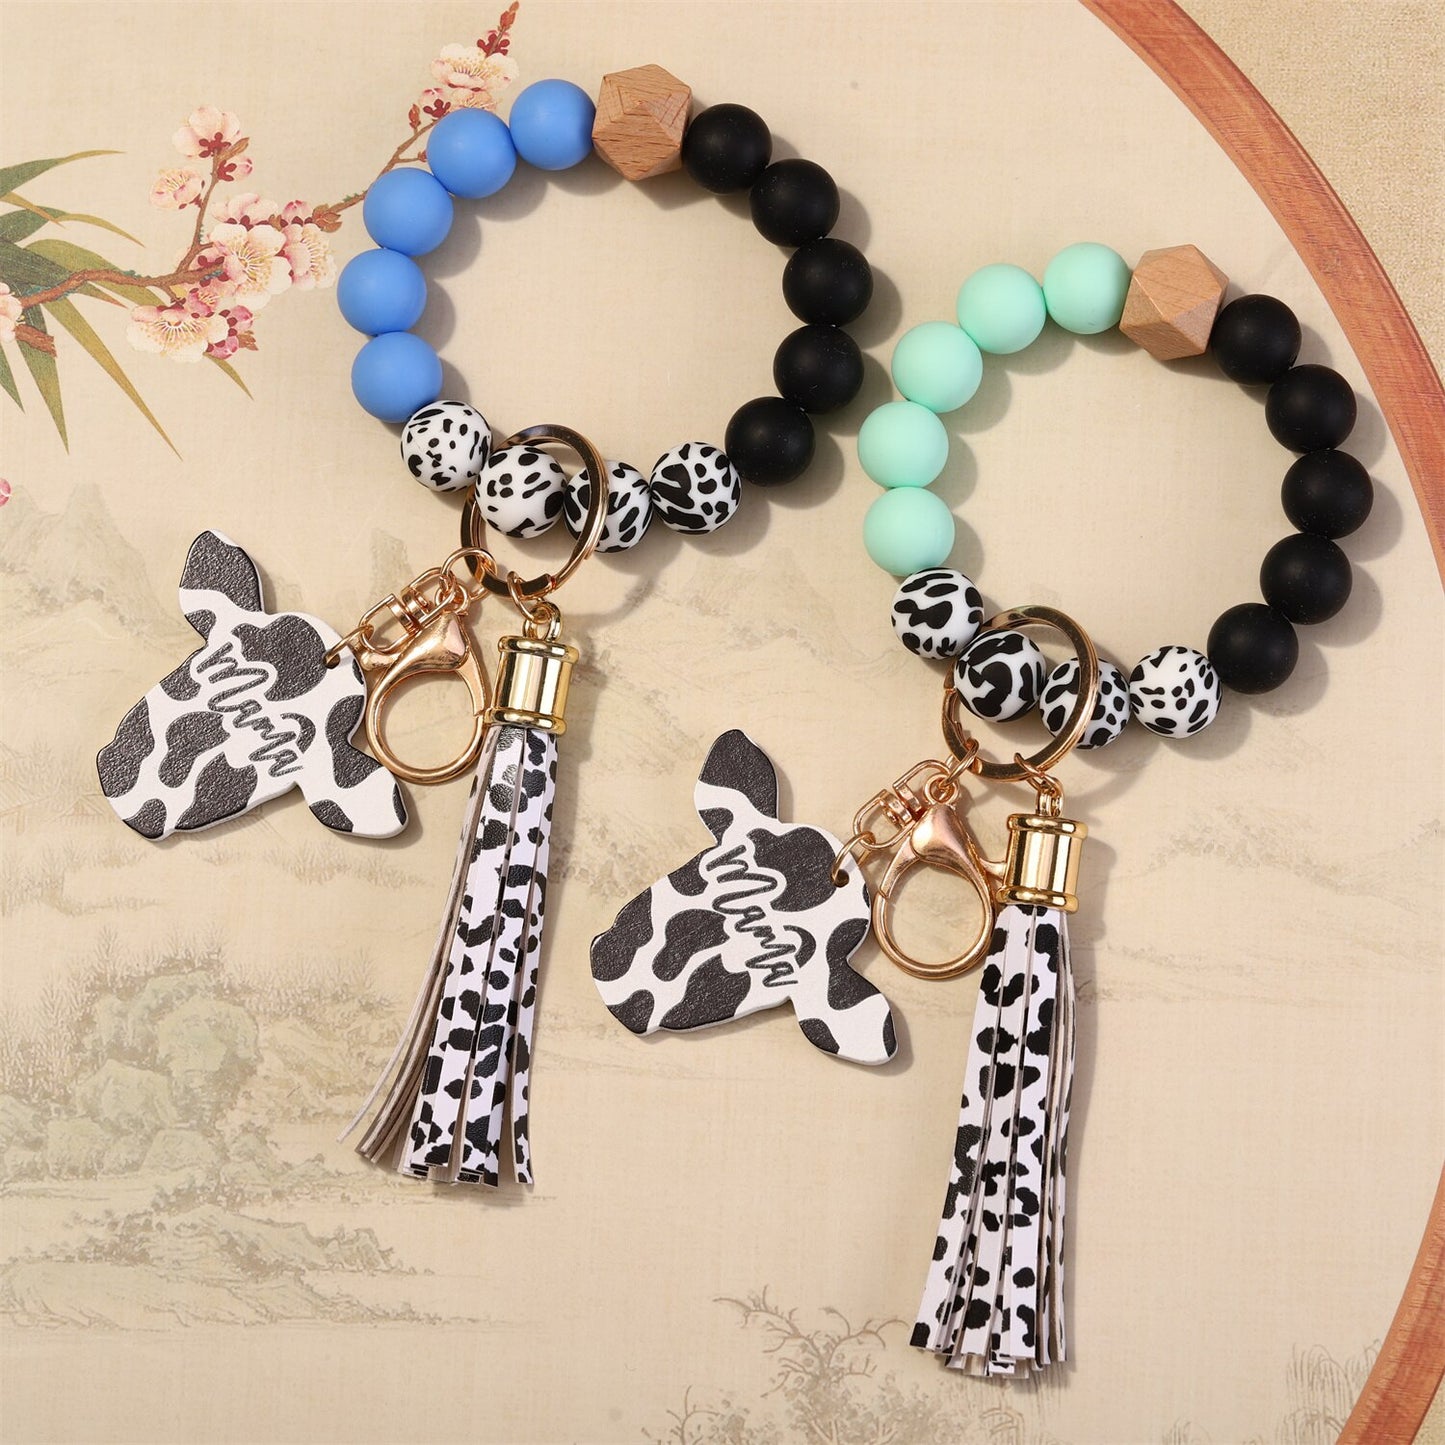 New Trendy Elegant Silicone Beads Bracelets Bangles for Women Key Chain Keychain Candy Color Large Beaded Bangle Charm Jewelry